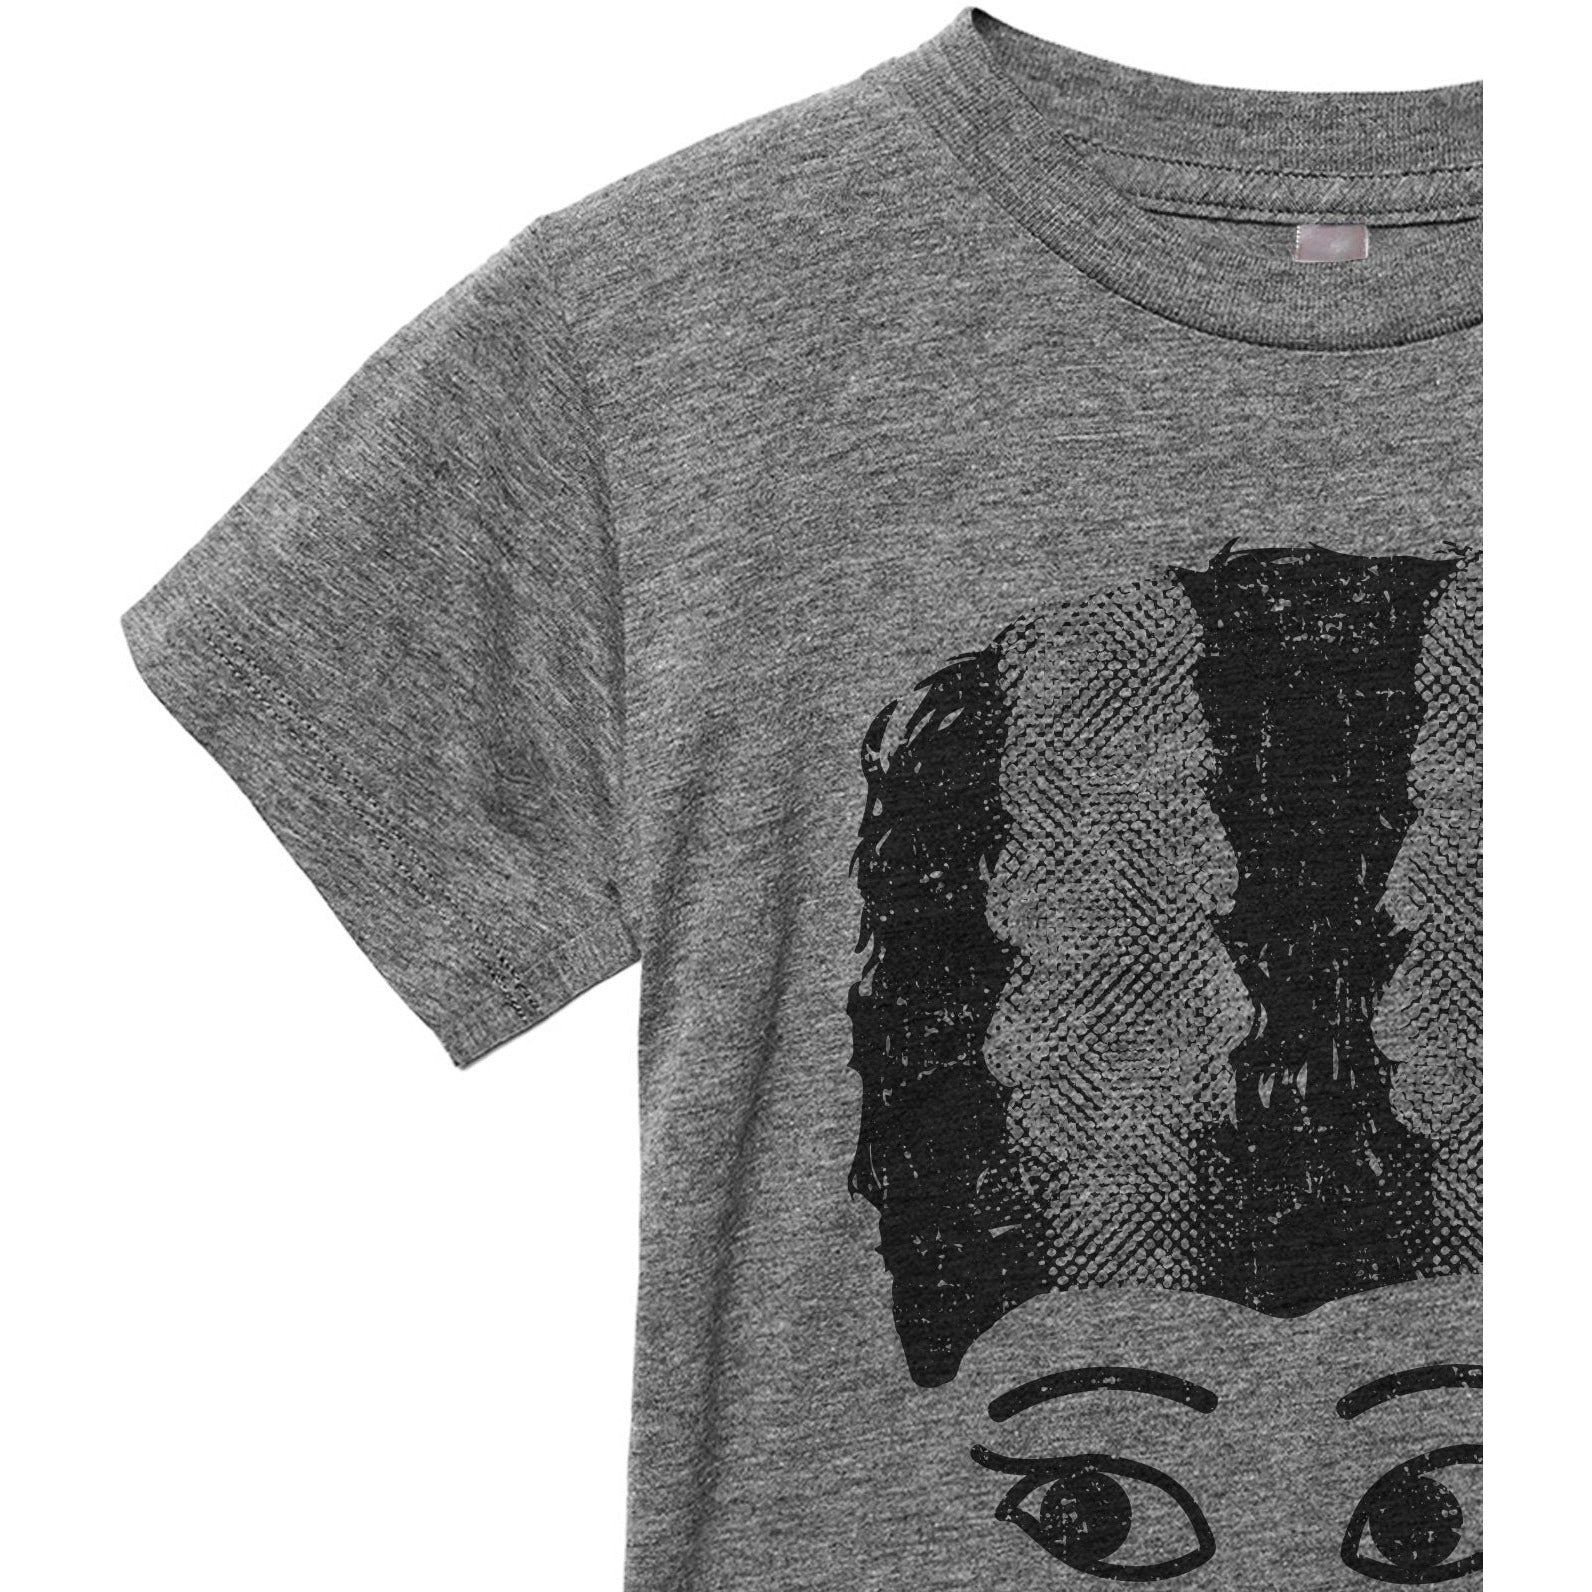 Bride Of Frankie Toddler's Go-To Crewneck Tee Heather Grey Close Up Sleeves Collar Details
